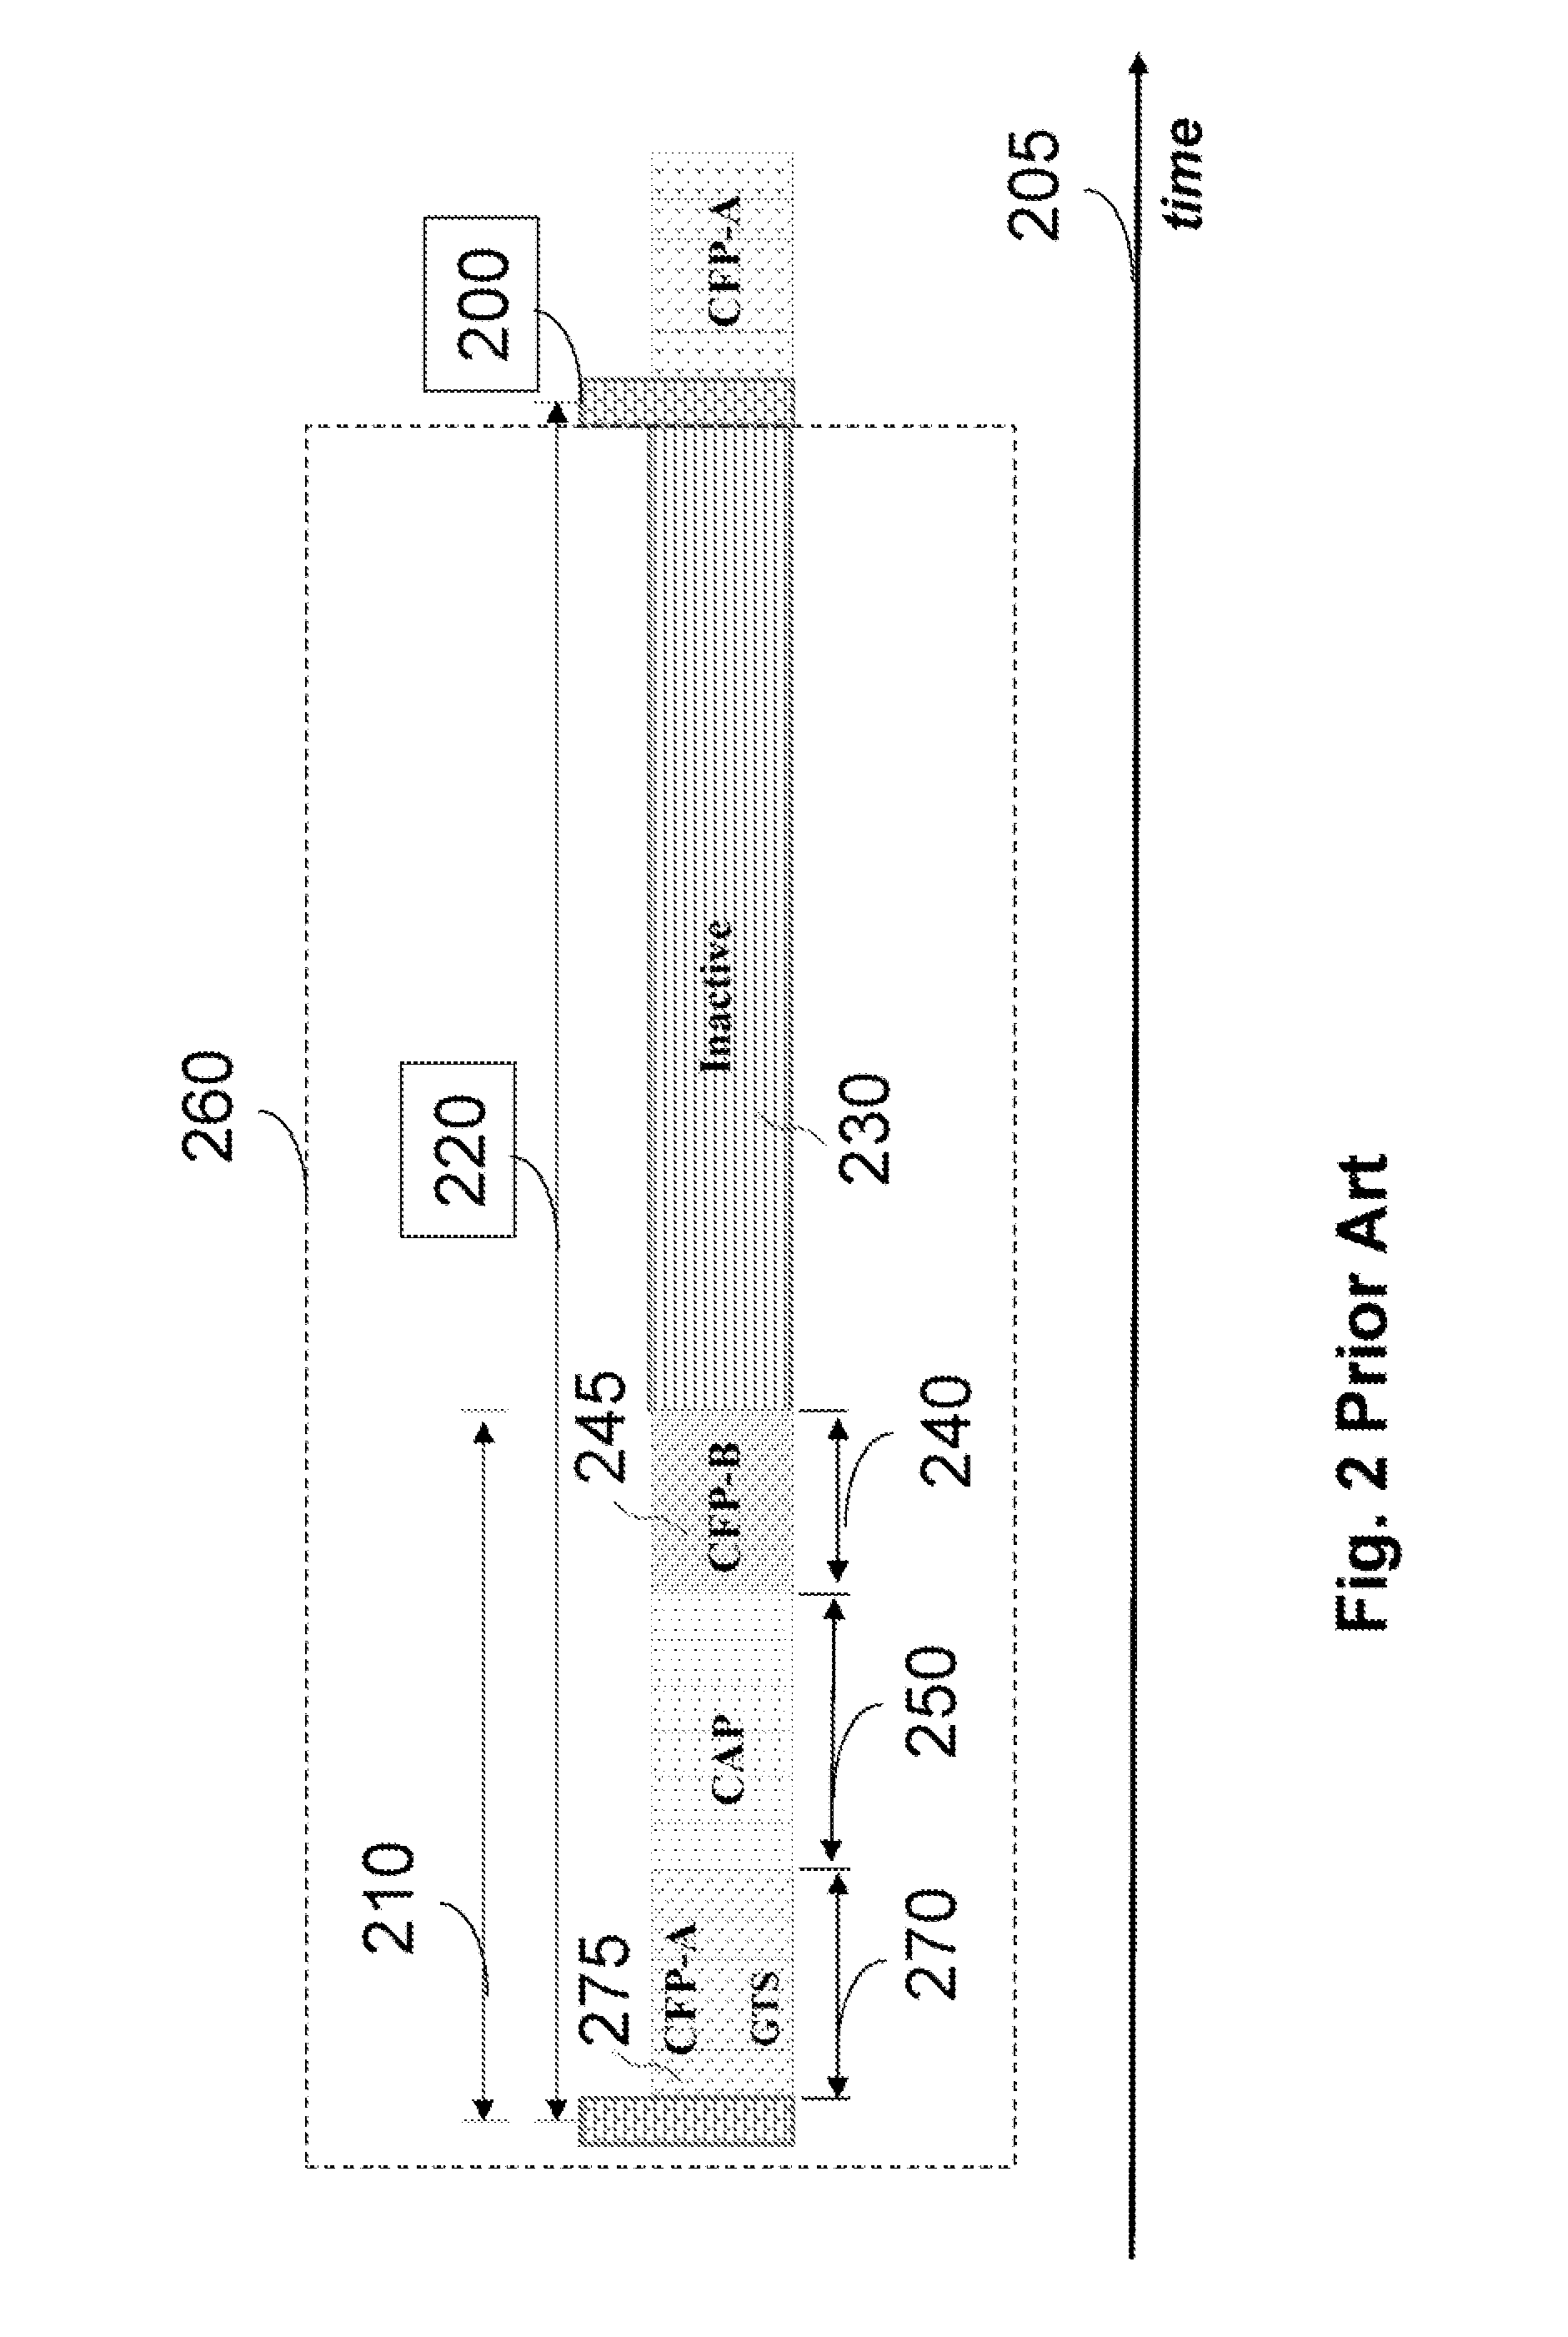 Hybrid Multiple Access Method and System in Wireless Networks